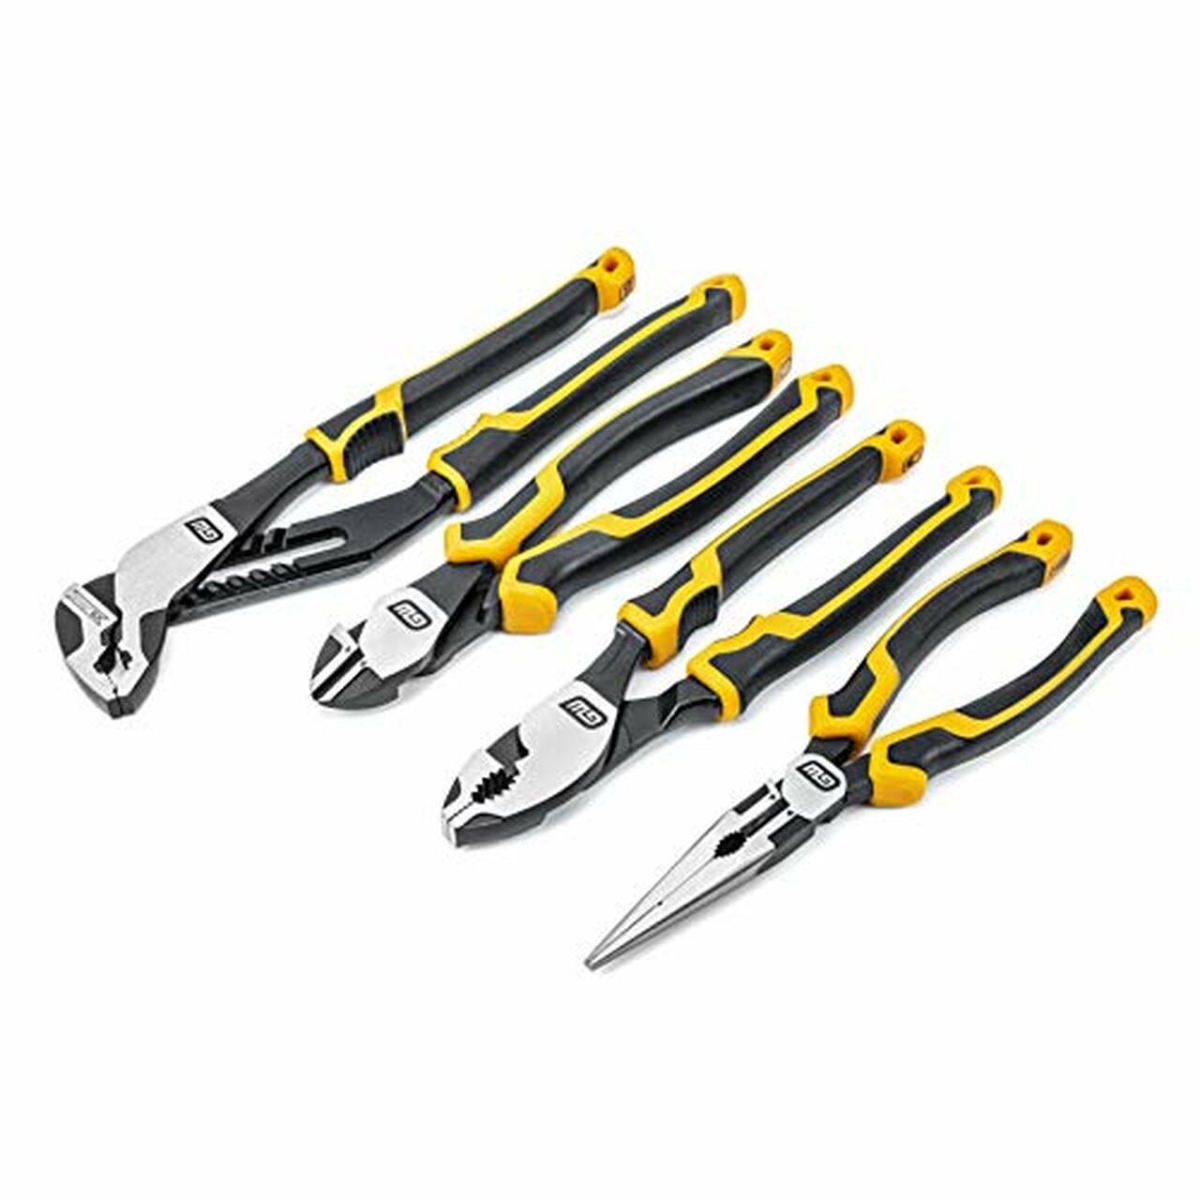 Picture of Apex Tools GWR82204C Mixed Dual Material Plier Set - 6 Piece